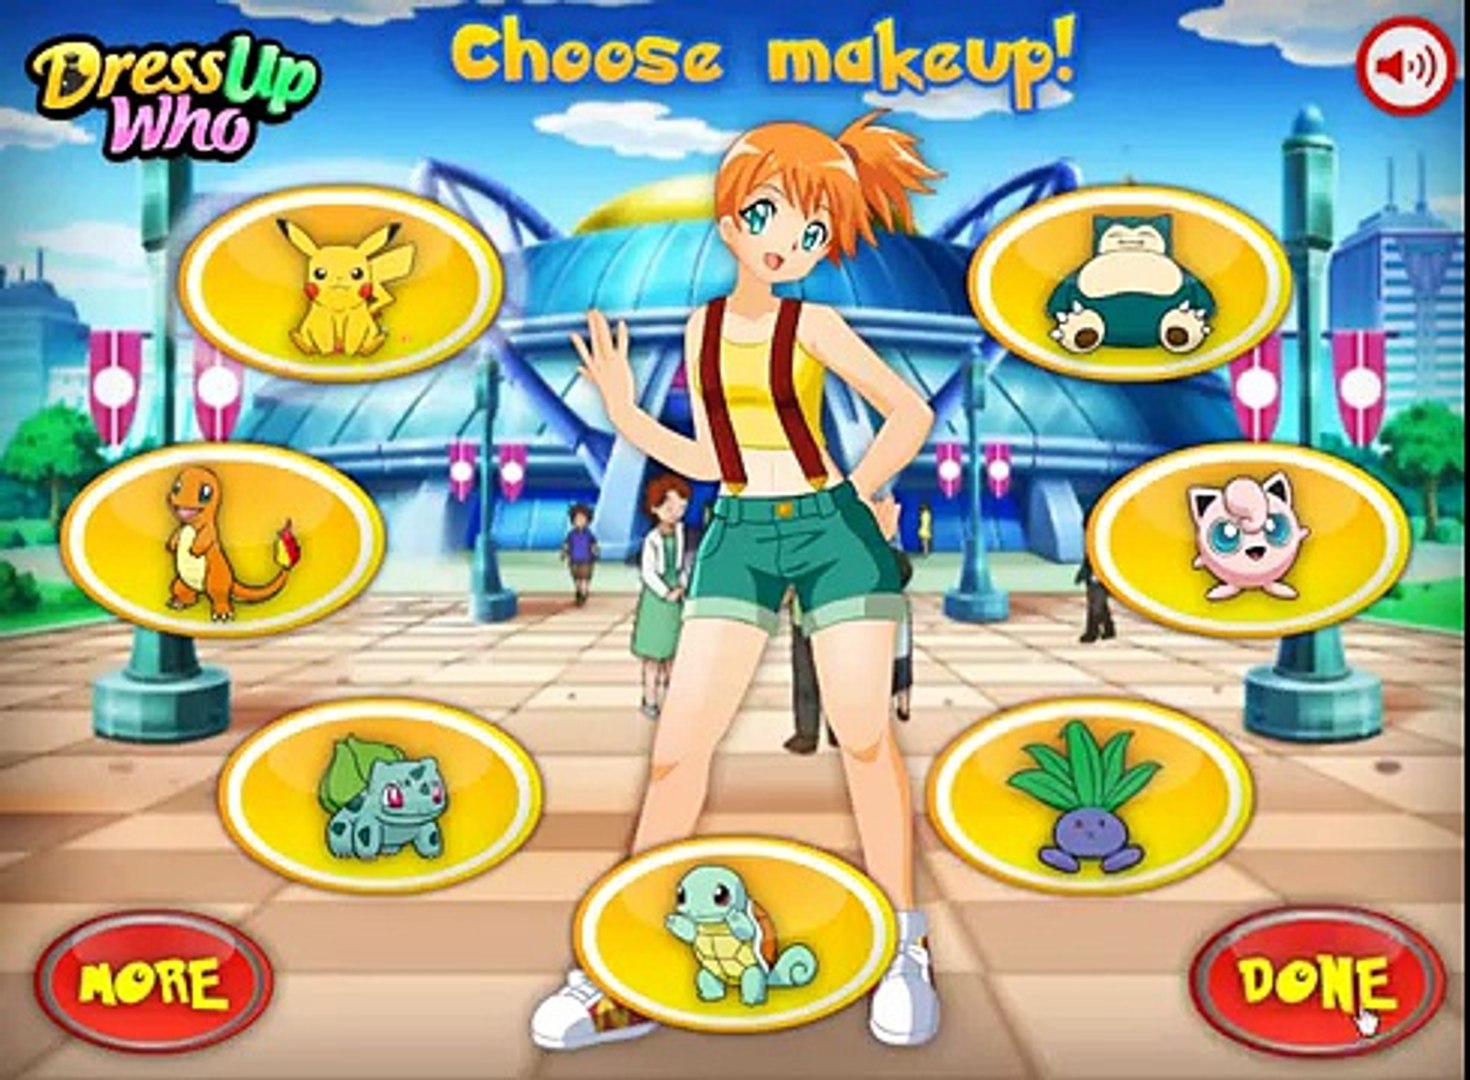 Mistys Pokemon Make Up - Games For Kids - Dailymotion Video